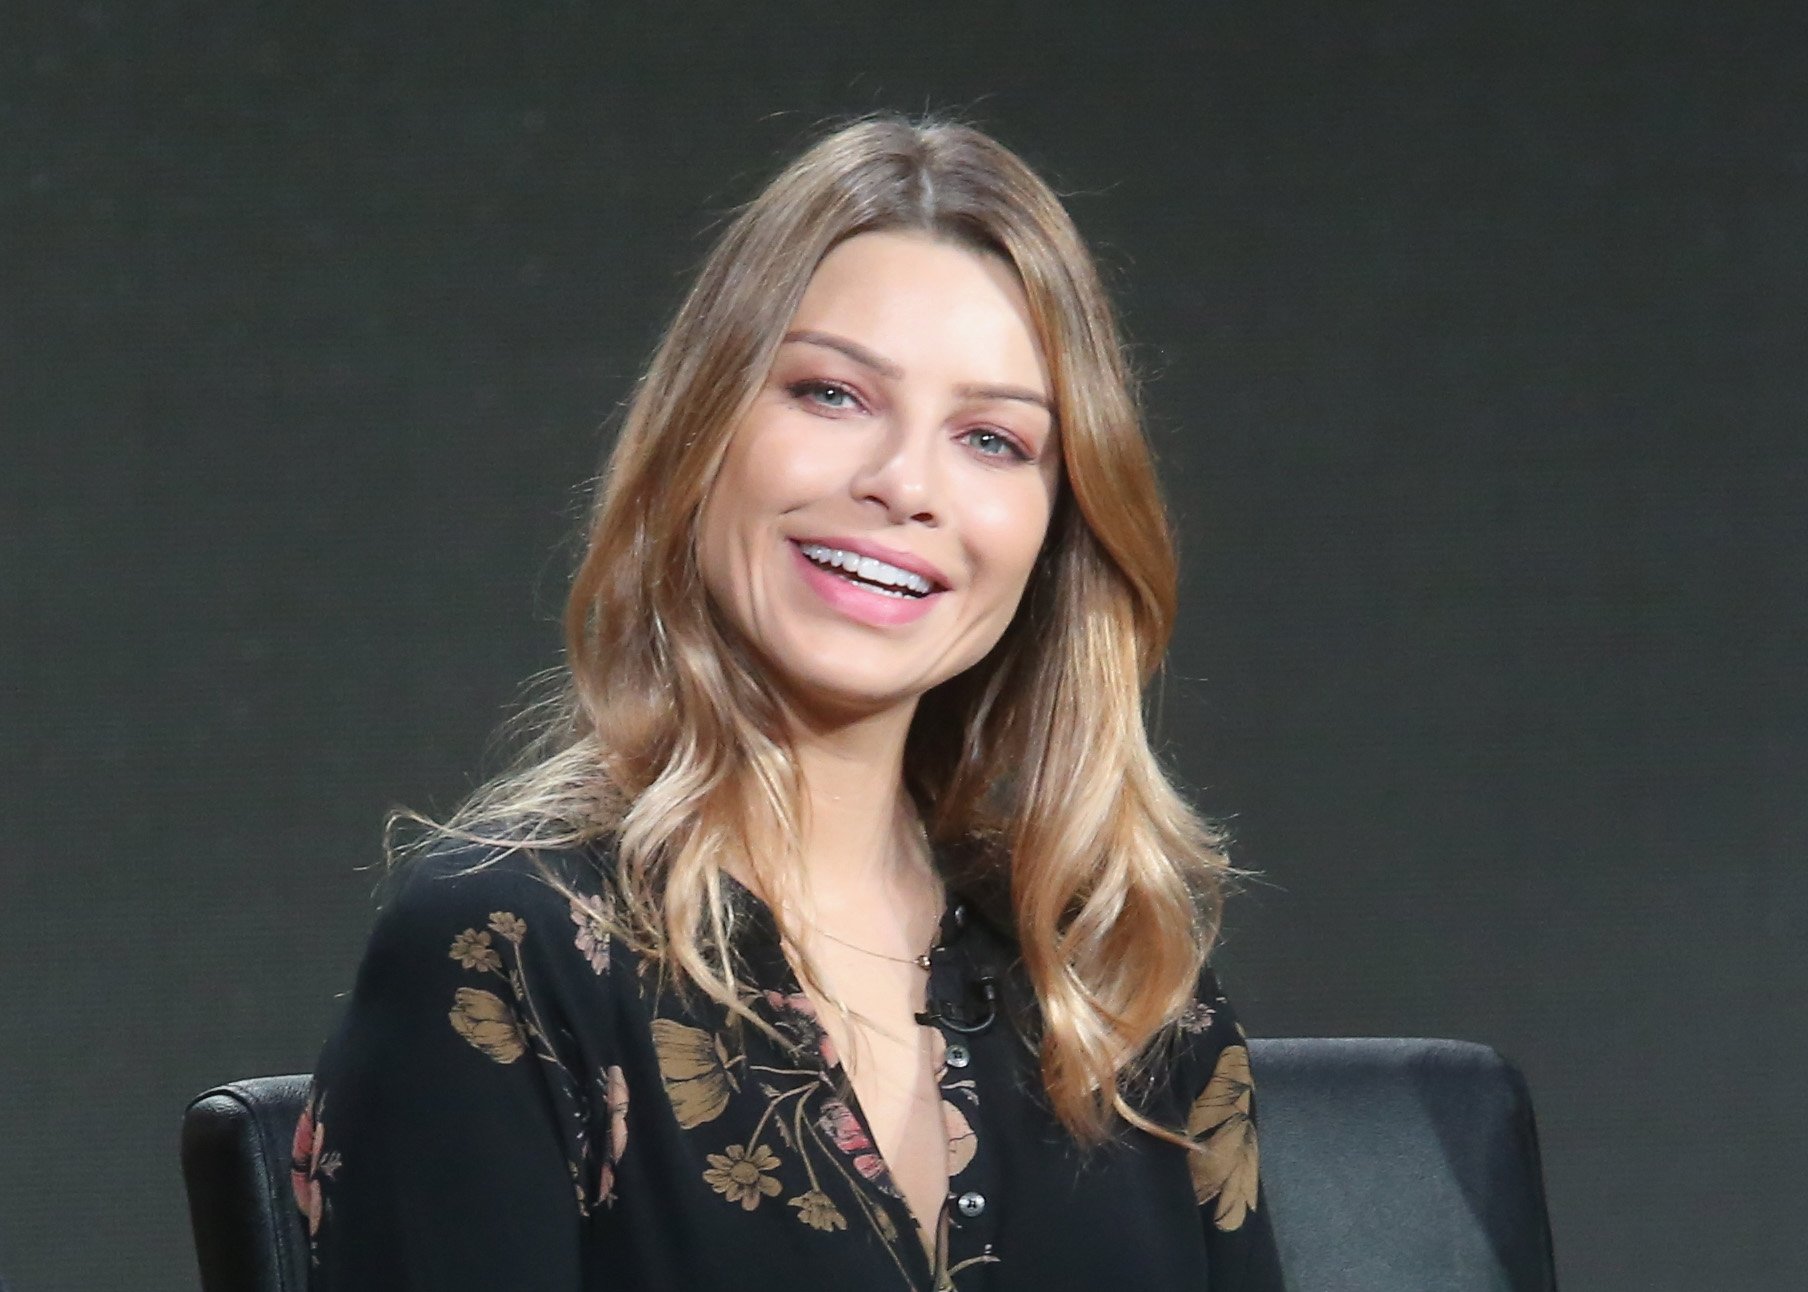 Lauren German laughing in front of a gray background